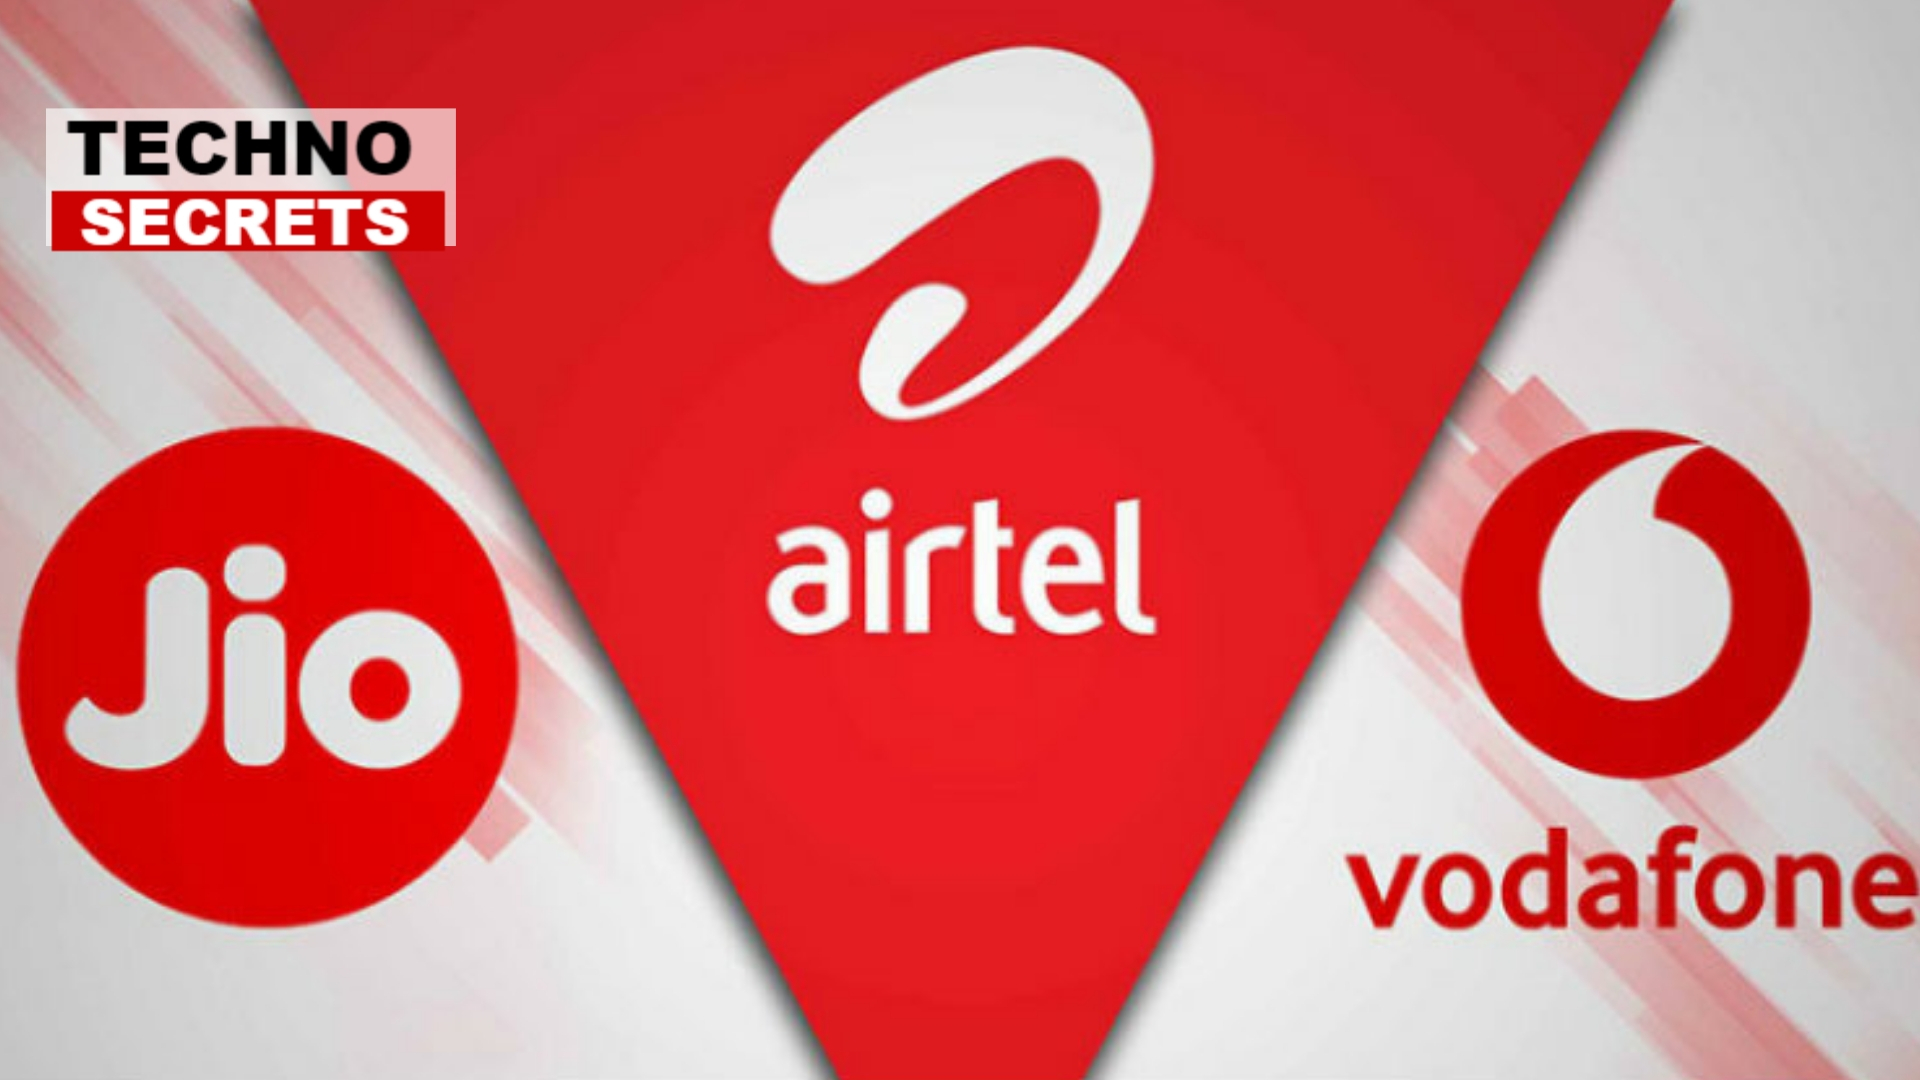 Prepaid Plans For #Airtel, #Reliance_Jio And #Vodafone Under Rs. 100.